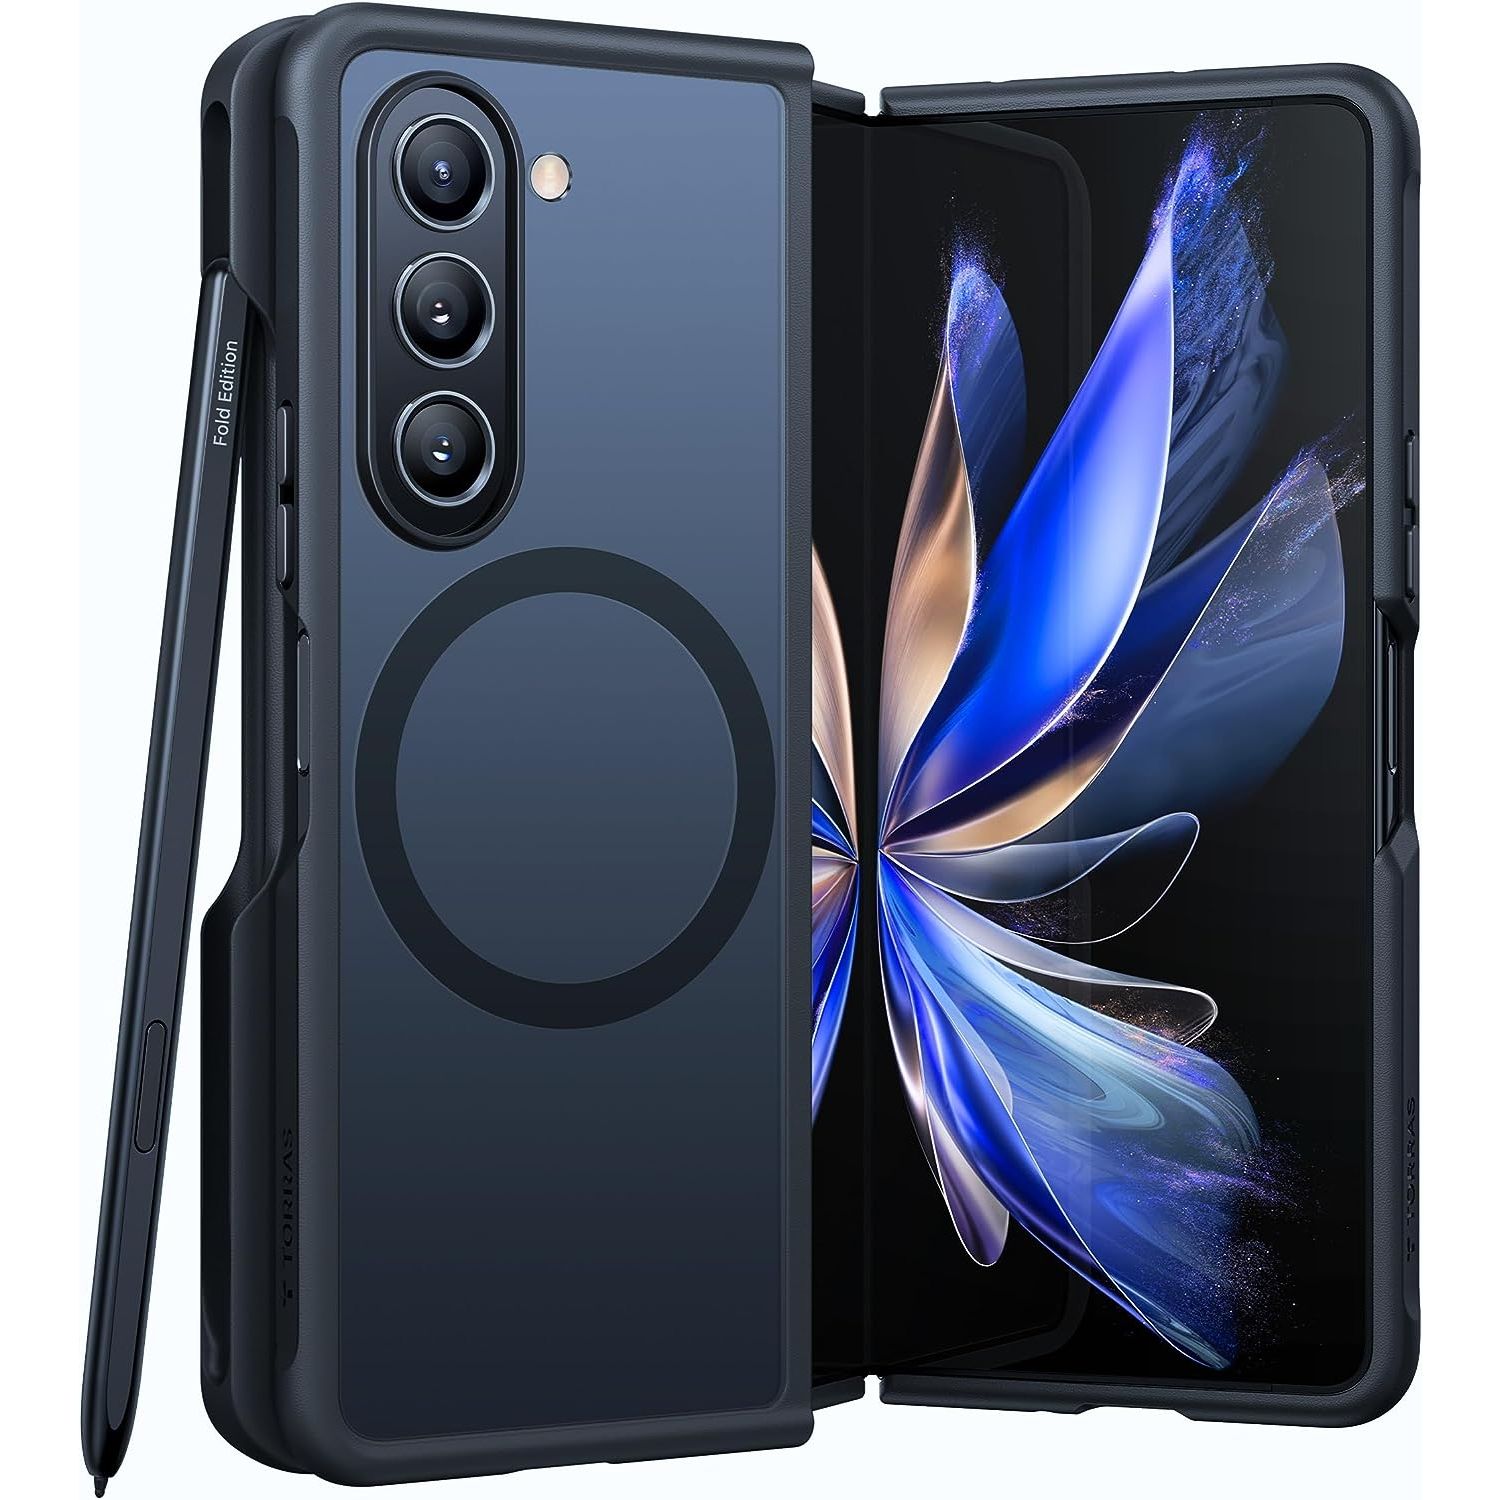 Buy premium Samsung Galaxy Z Fold 5 Cover & Cases Online at  –